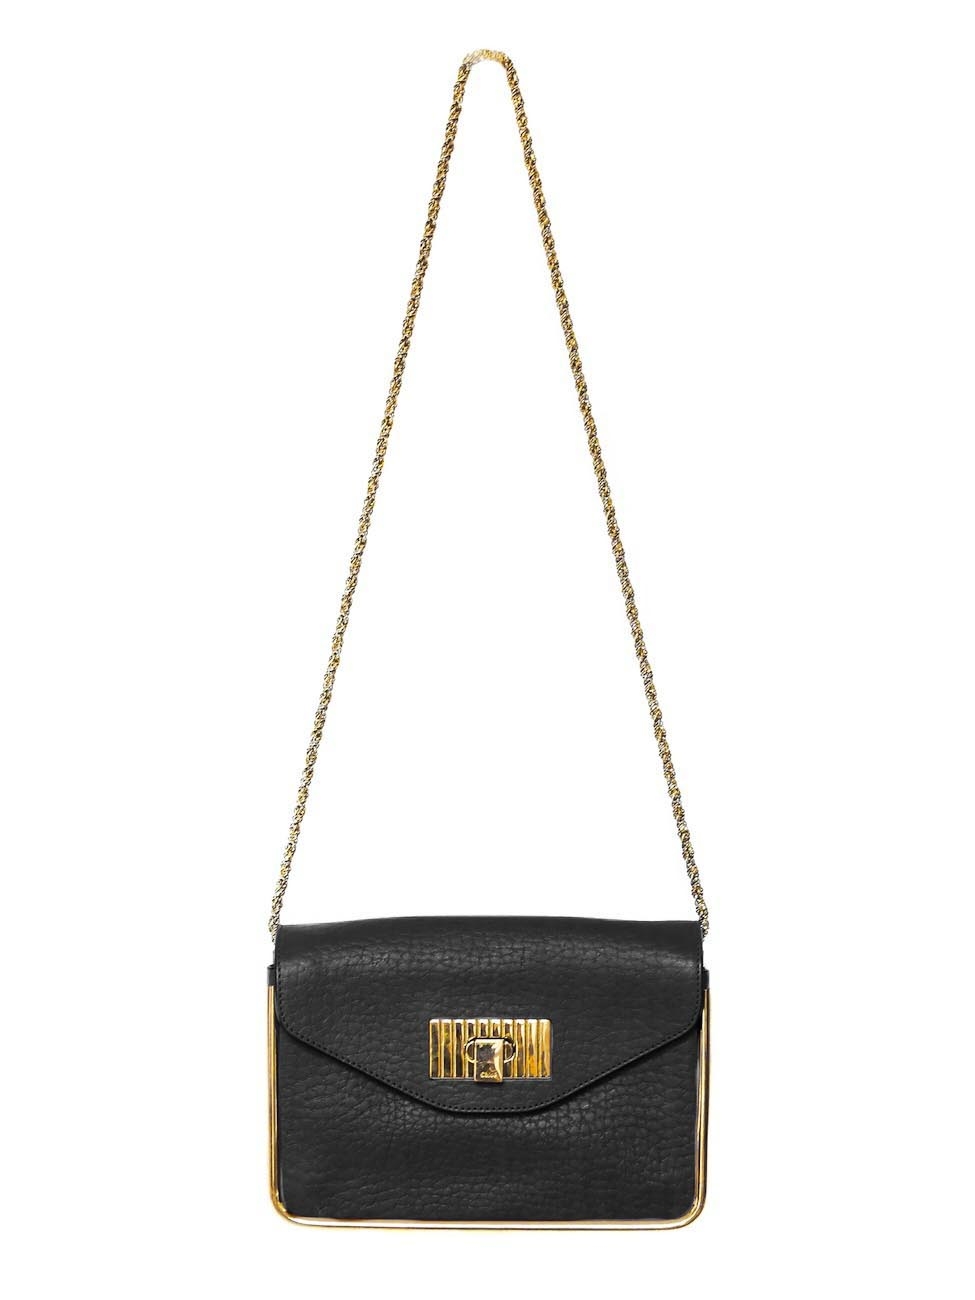 Black Leather-Look Quilted Chain Strap Shoulder Bag | New Look